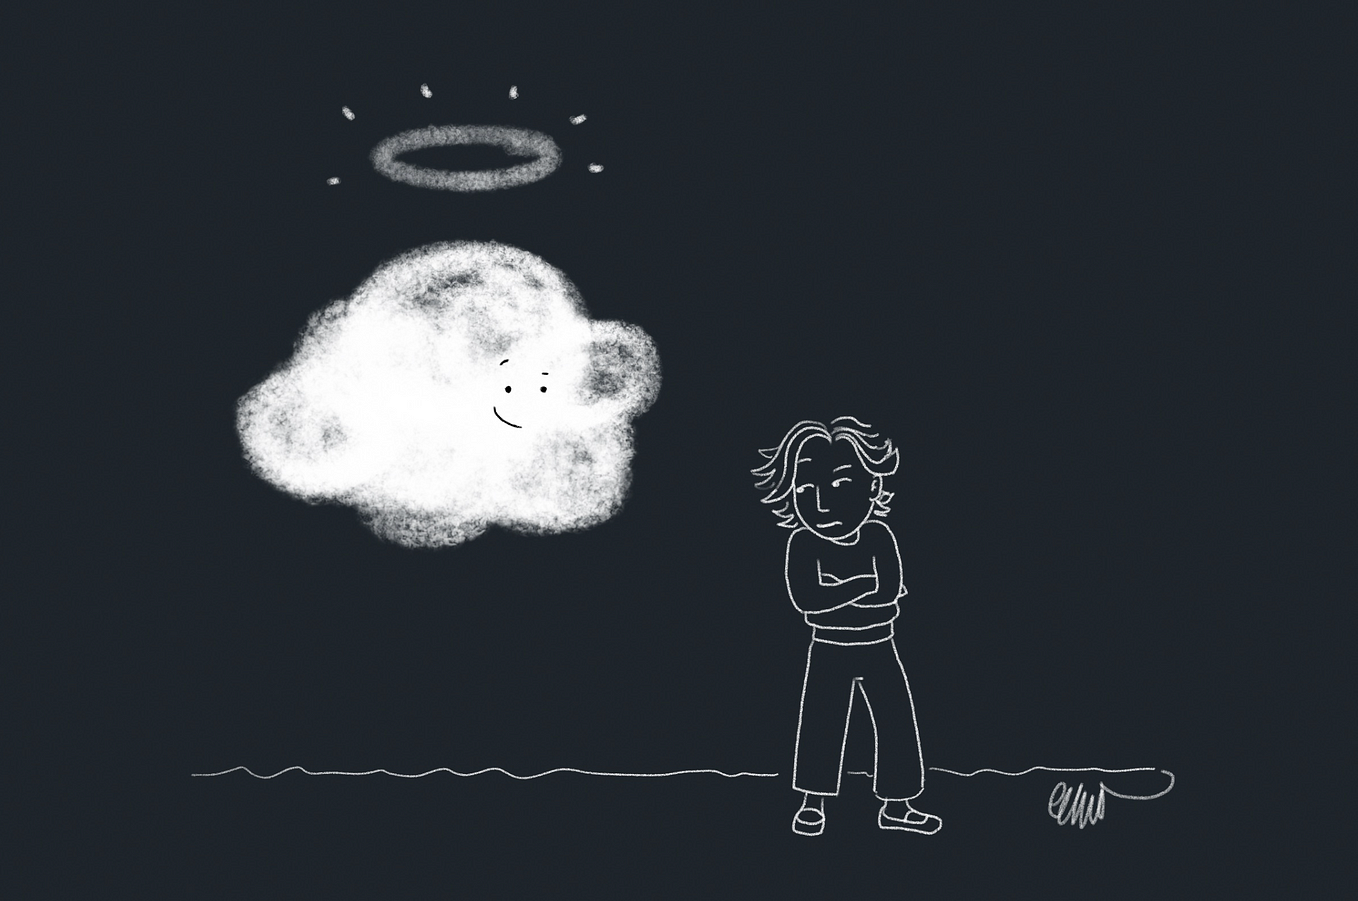 White pencil-style line work cartoon on a black background. There’s a white cloud floating on the middle left, with a friendly face and a glowing halo above it. A person representing the author standing and facing towards the right, looks back at the cloud. Their body language is dripping with skepticism.